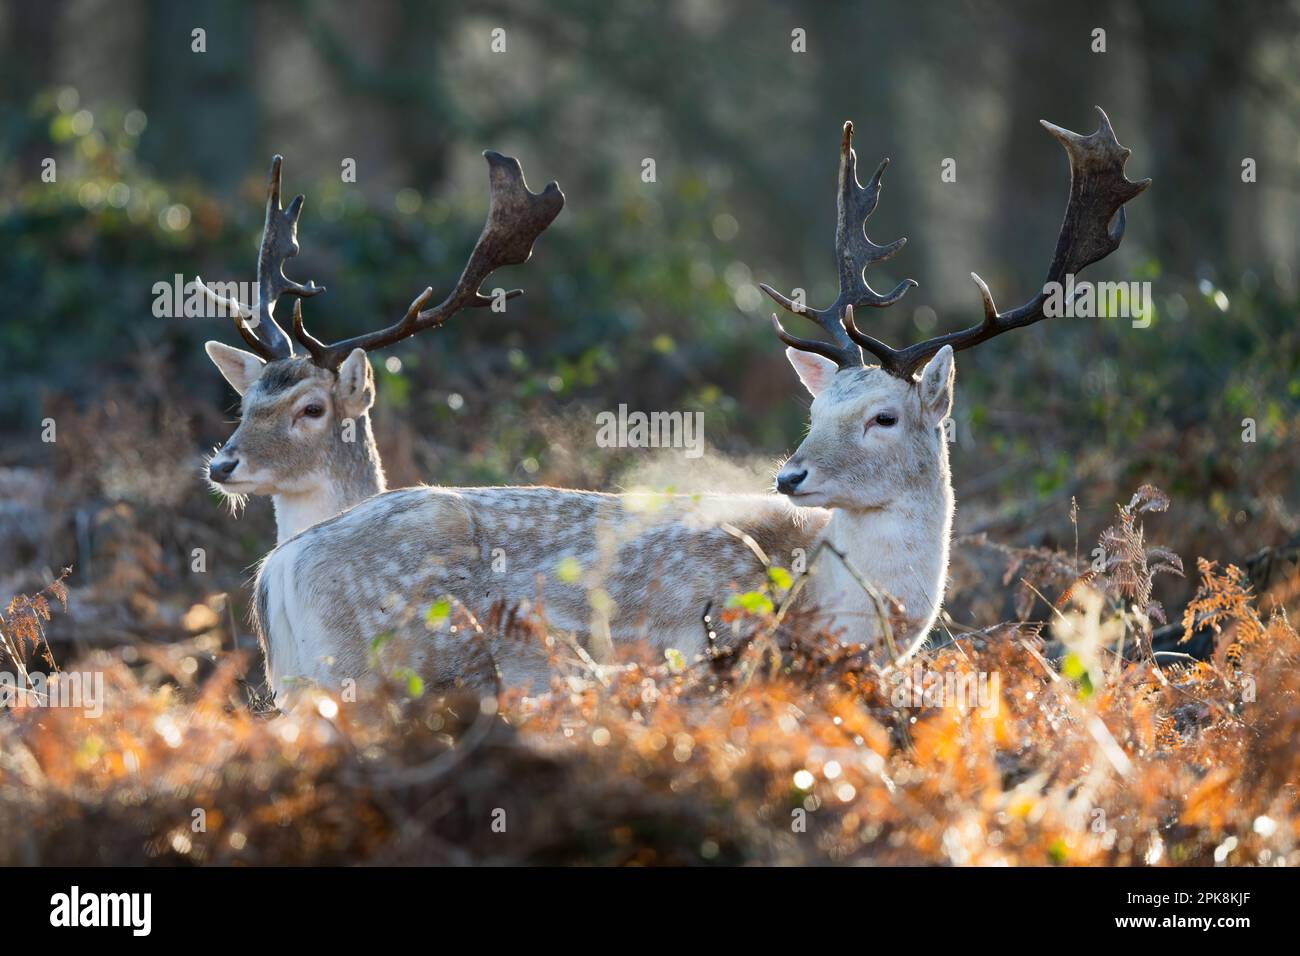 A pair of fallow deer fawns (Dama dama) in Richmond Park, London.  ** This content is being exclusively managed by SWNS. To licence for editorial or c Stock Photo